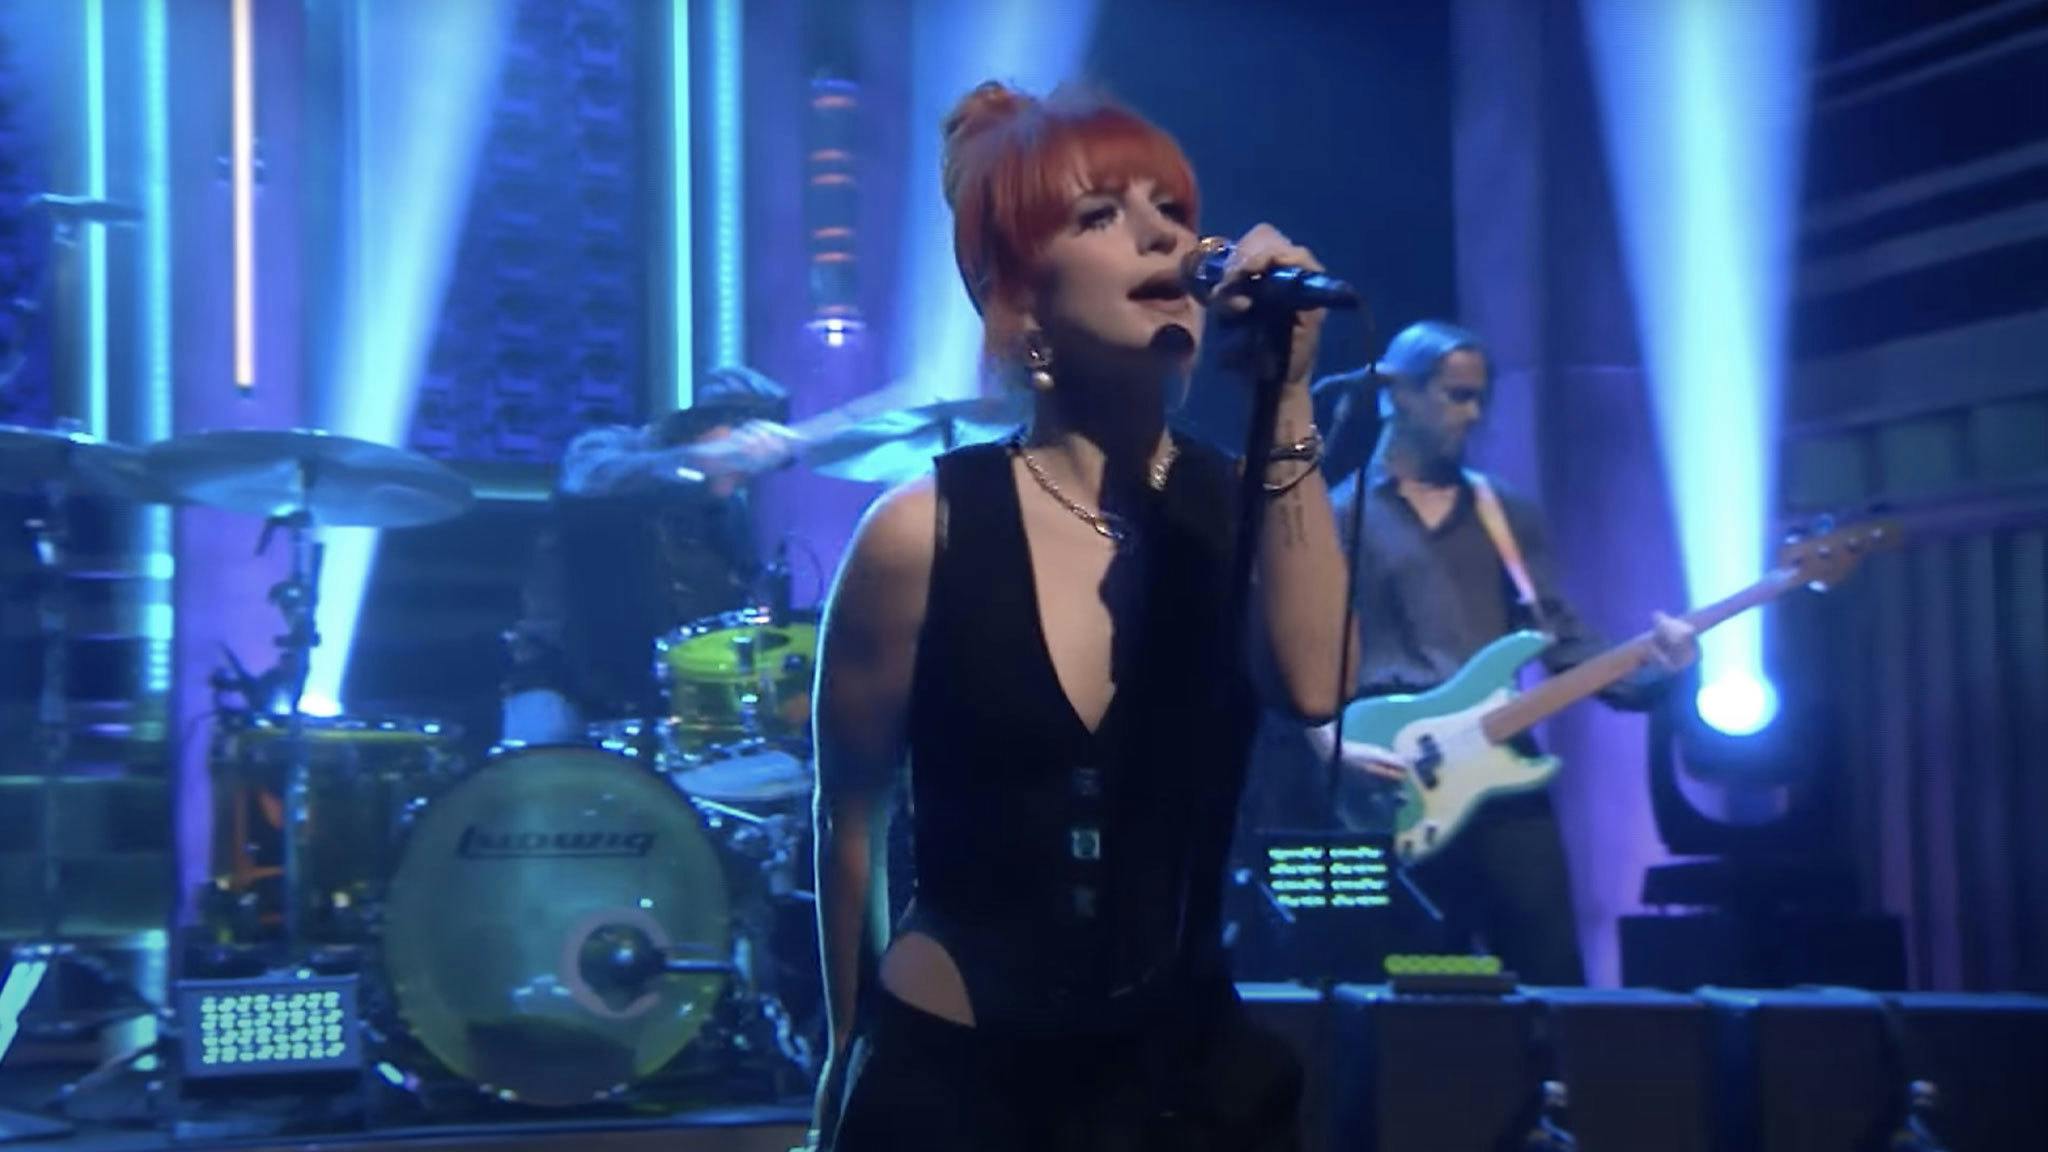 See Paramore perform This Is Why on The Tonight Show Starring Jimmy Fallon